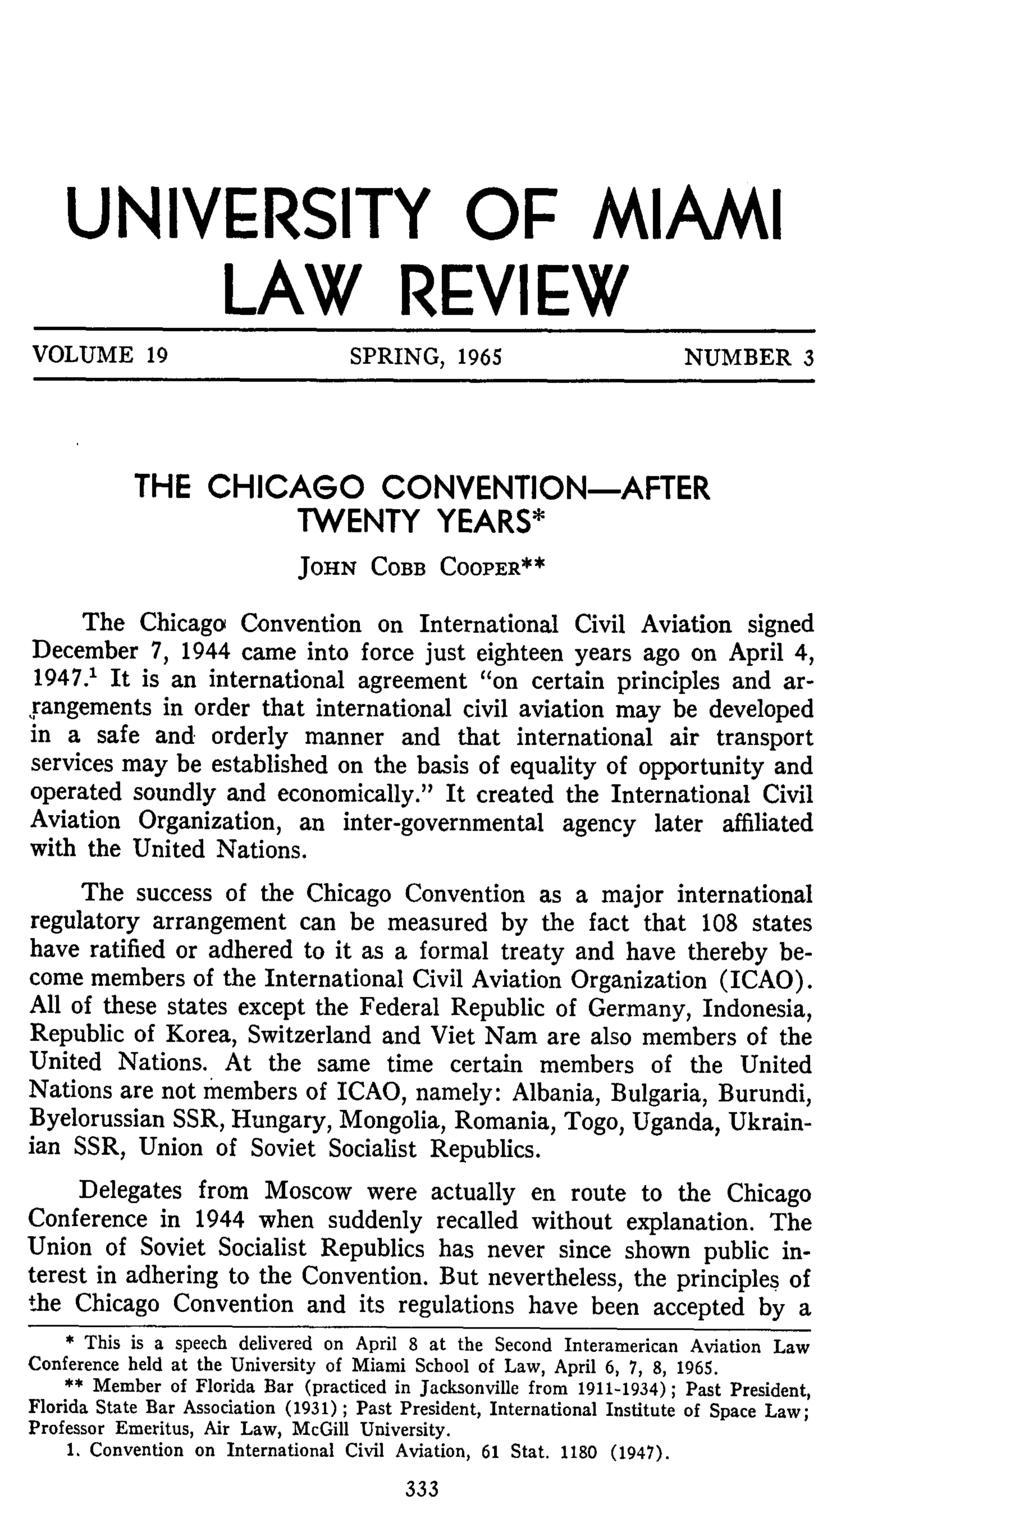 UNIVERSITY OF MIAMI LAW REVIEW VOLUME 19 SPRING, 1965 NUMBER 3 THE CHICAGO CONVENTION-AFTER TWENTY YEARS* JOHN COBB COOPER*" The Chicago Convention on International Civil Aviation signed December 7,